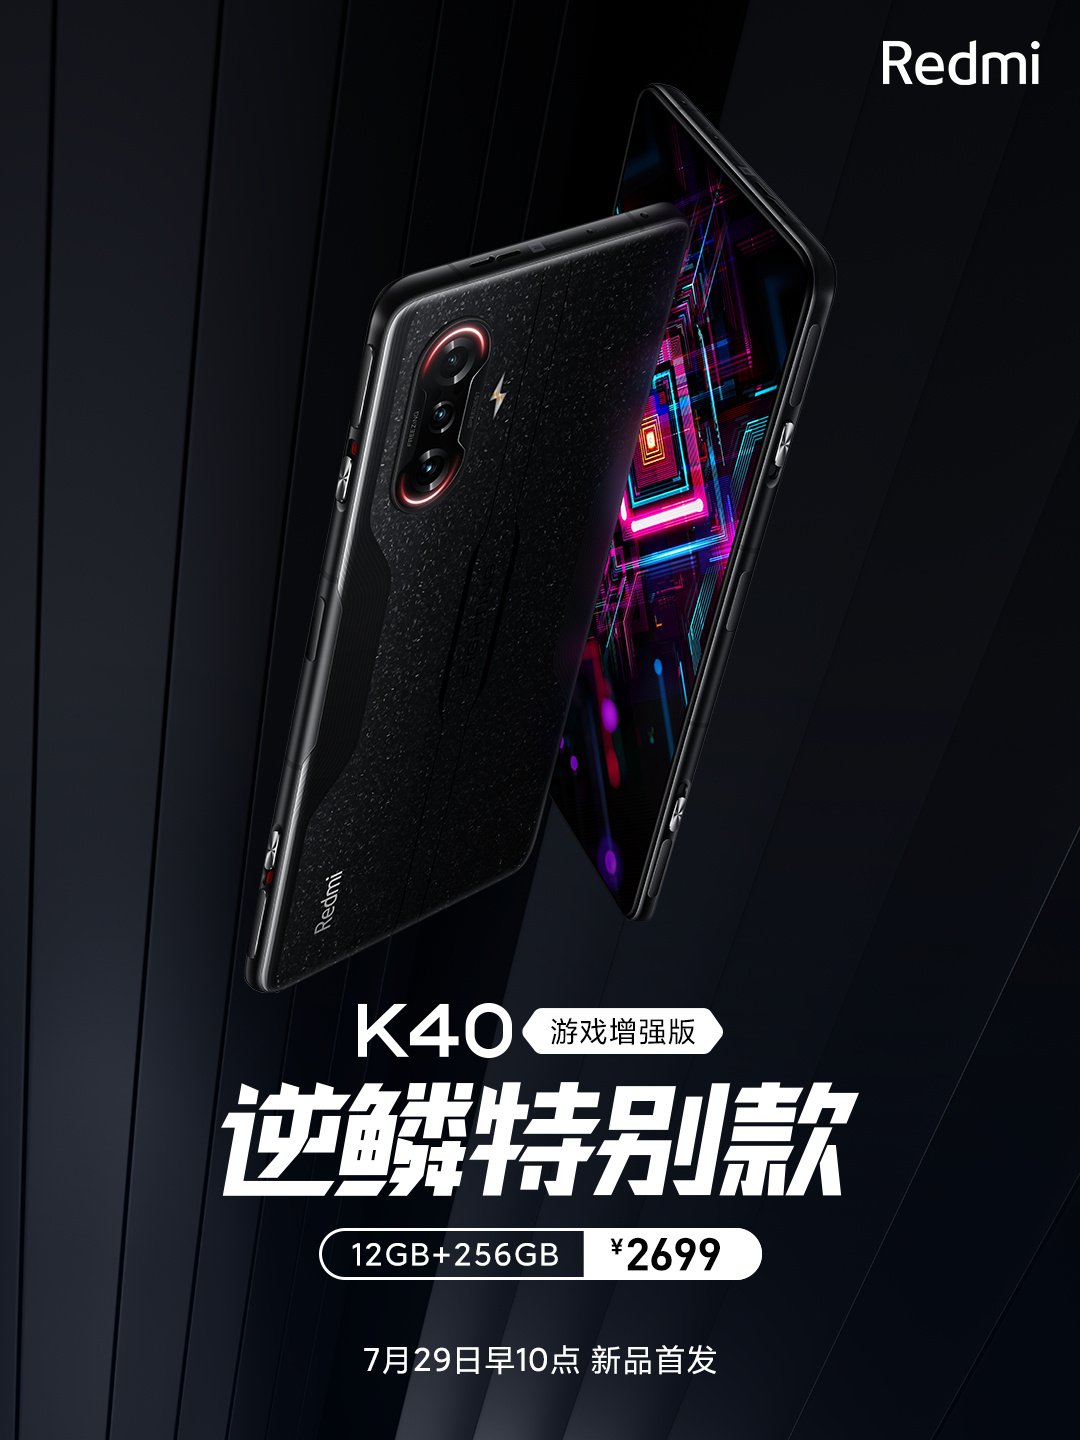 Redmi-K40-Gaming-Edition-Inverse-Scale-poster